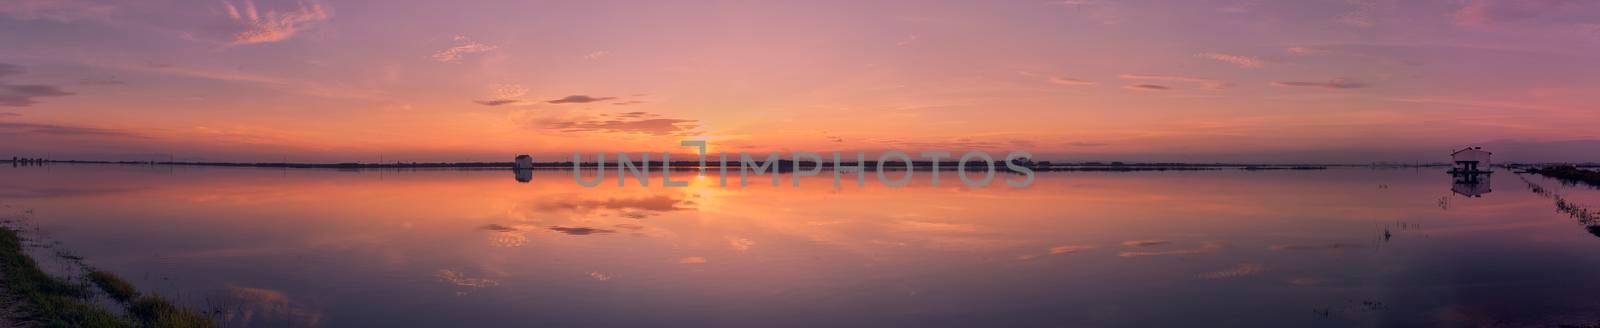 Sunset on the lake, with clouds. Rustic houses, vegetation, sun. long exposure, Albufera Valencia. Panoramic photo